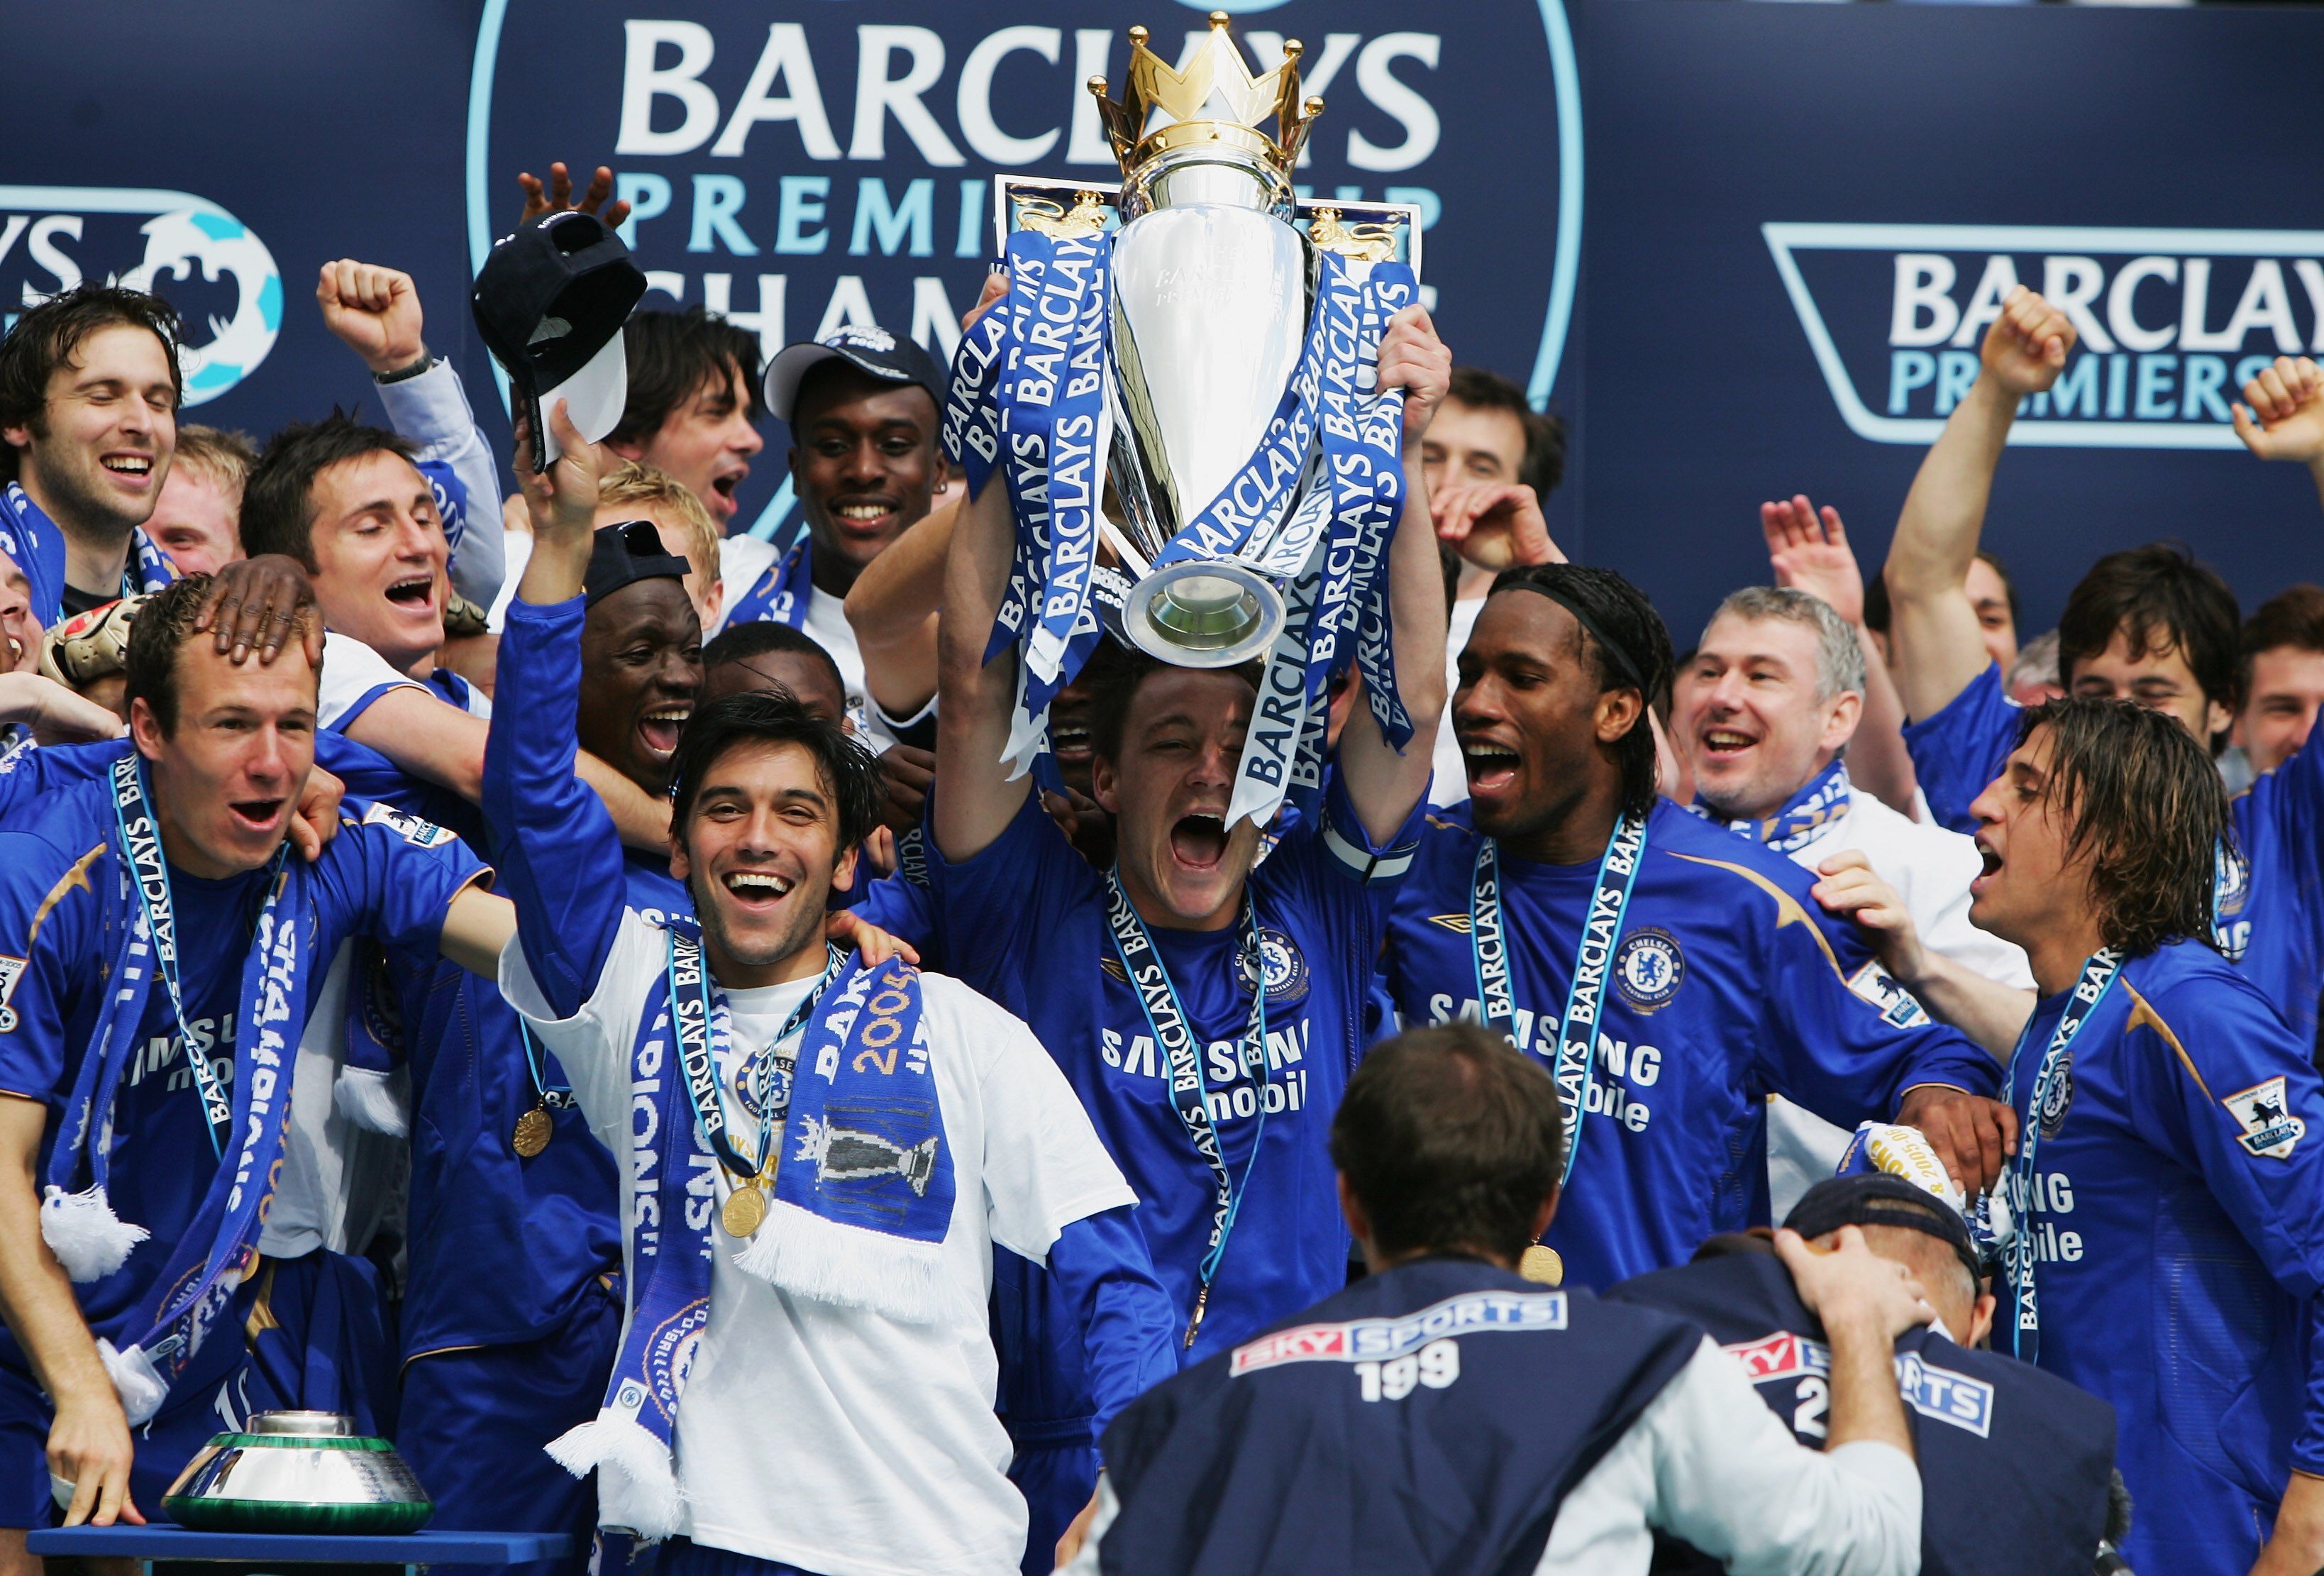 LONDON - APRIL 29: The Chelsea team celebrate winning the Barclays Premiership title after the match between Chelsea and Manchester United at Stamford Bridge on April 29, 2006 in London, England. (Photo by Mike Hewitt/Getty Images)